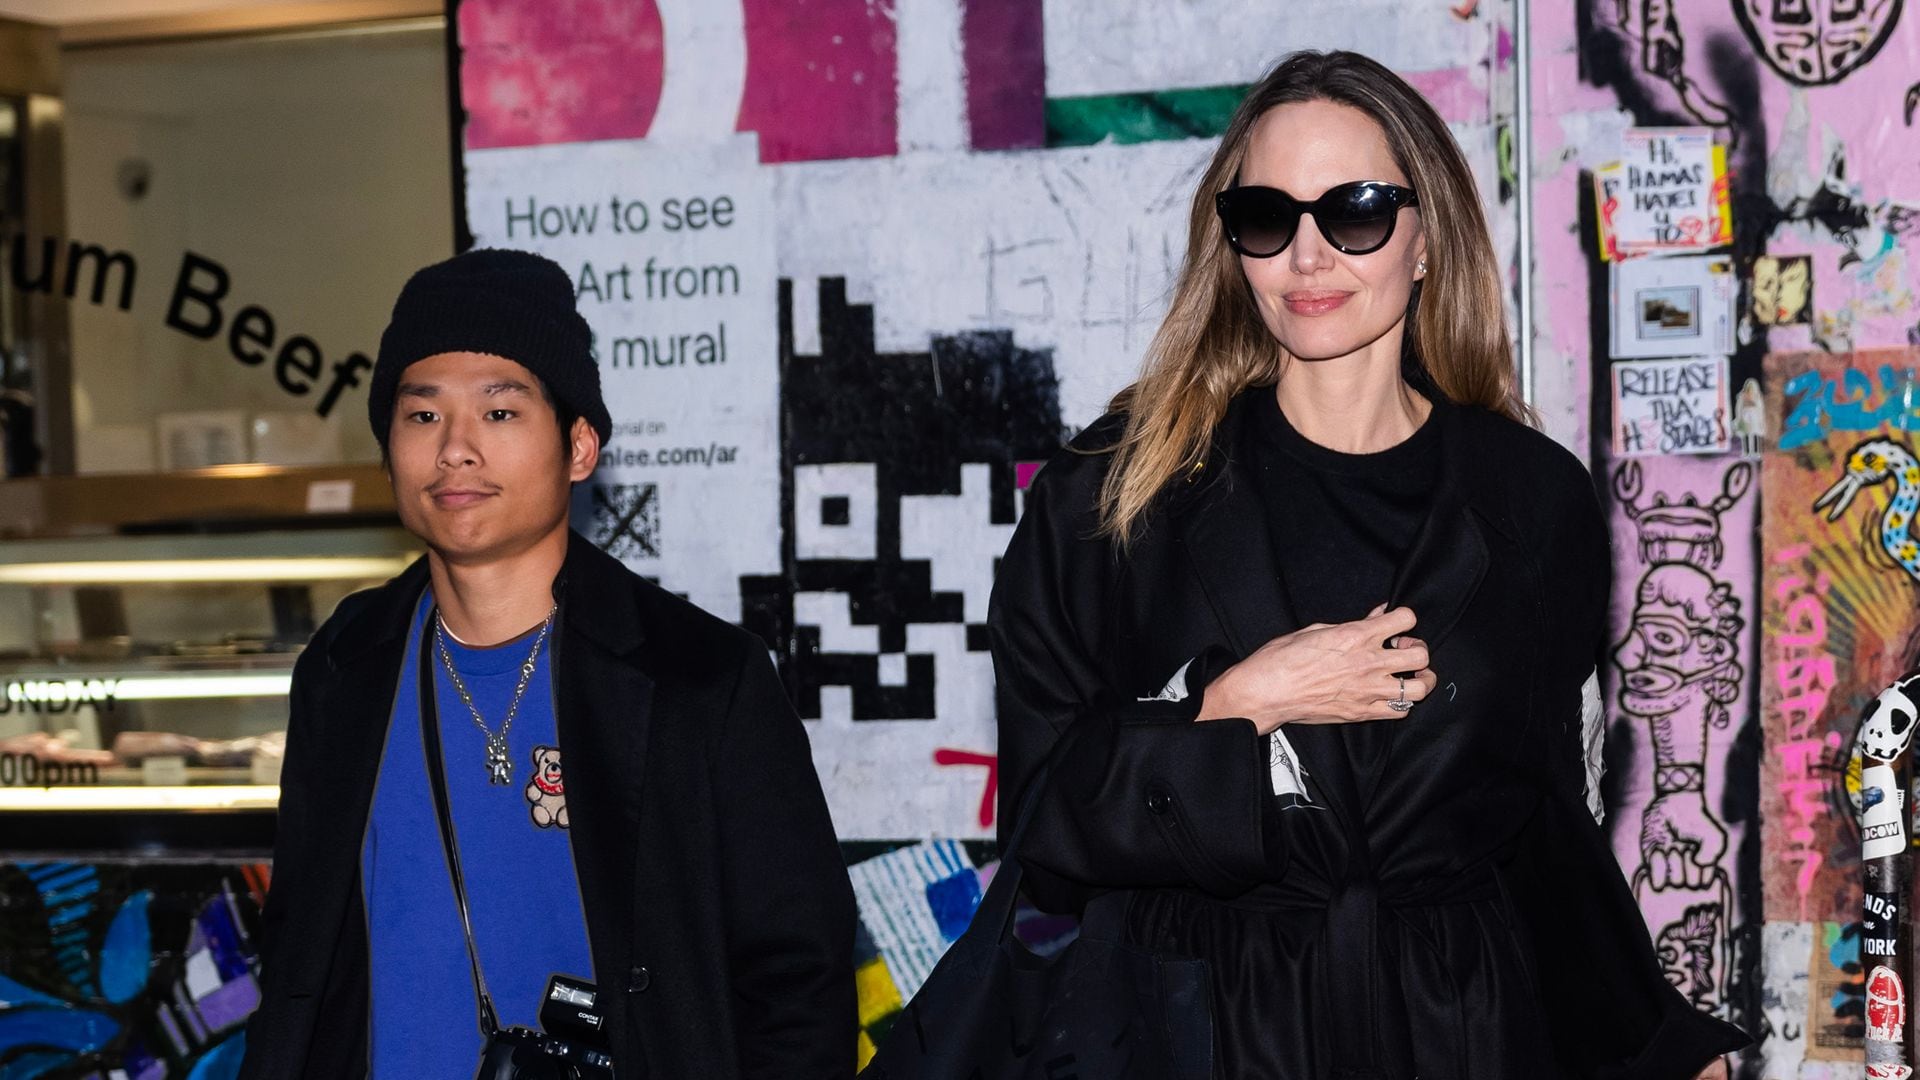 Angelina Jolie's son has been released from the ICU after a scary E-Bike accident